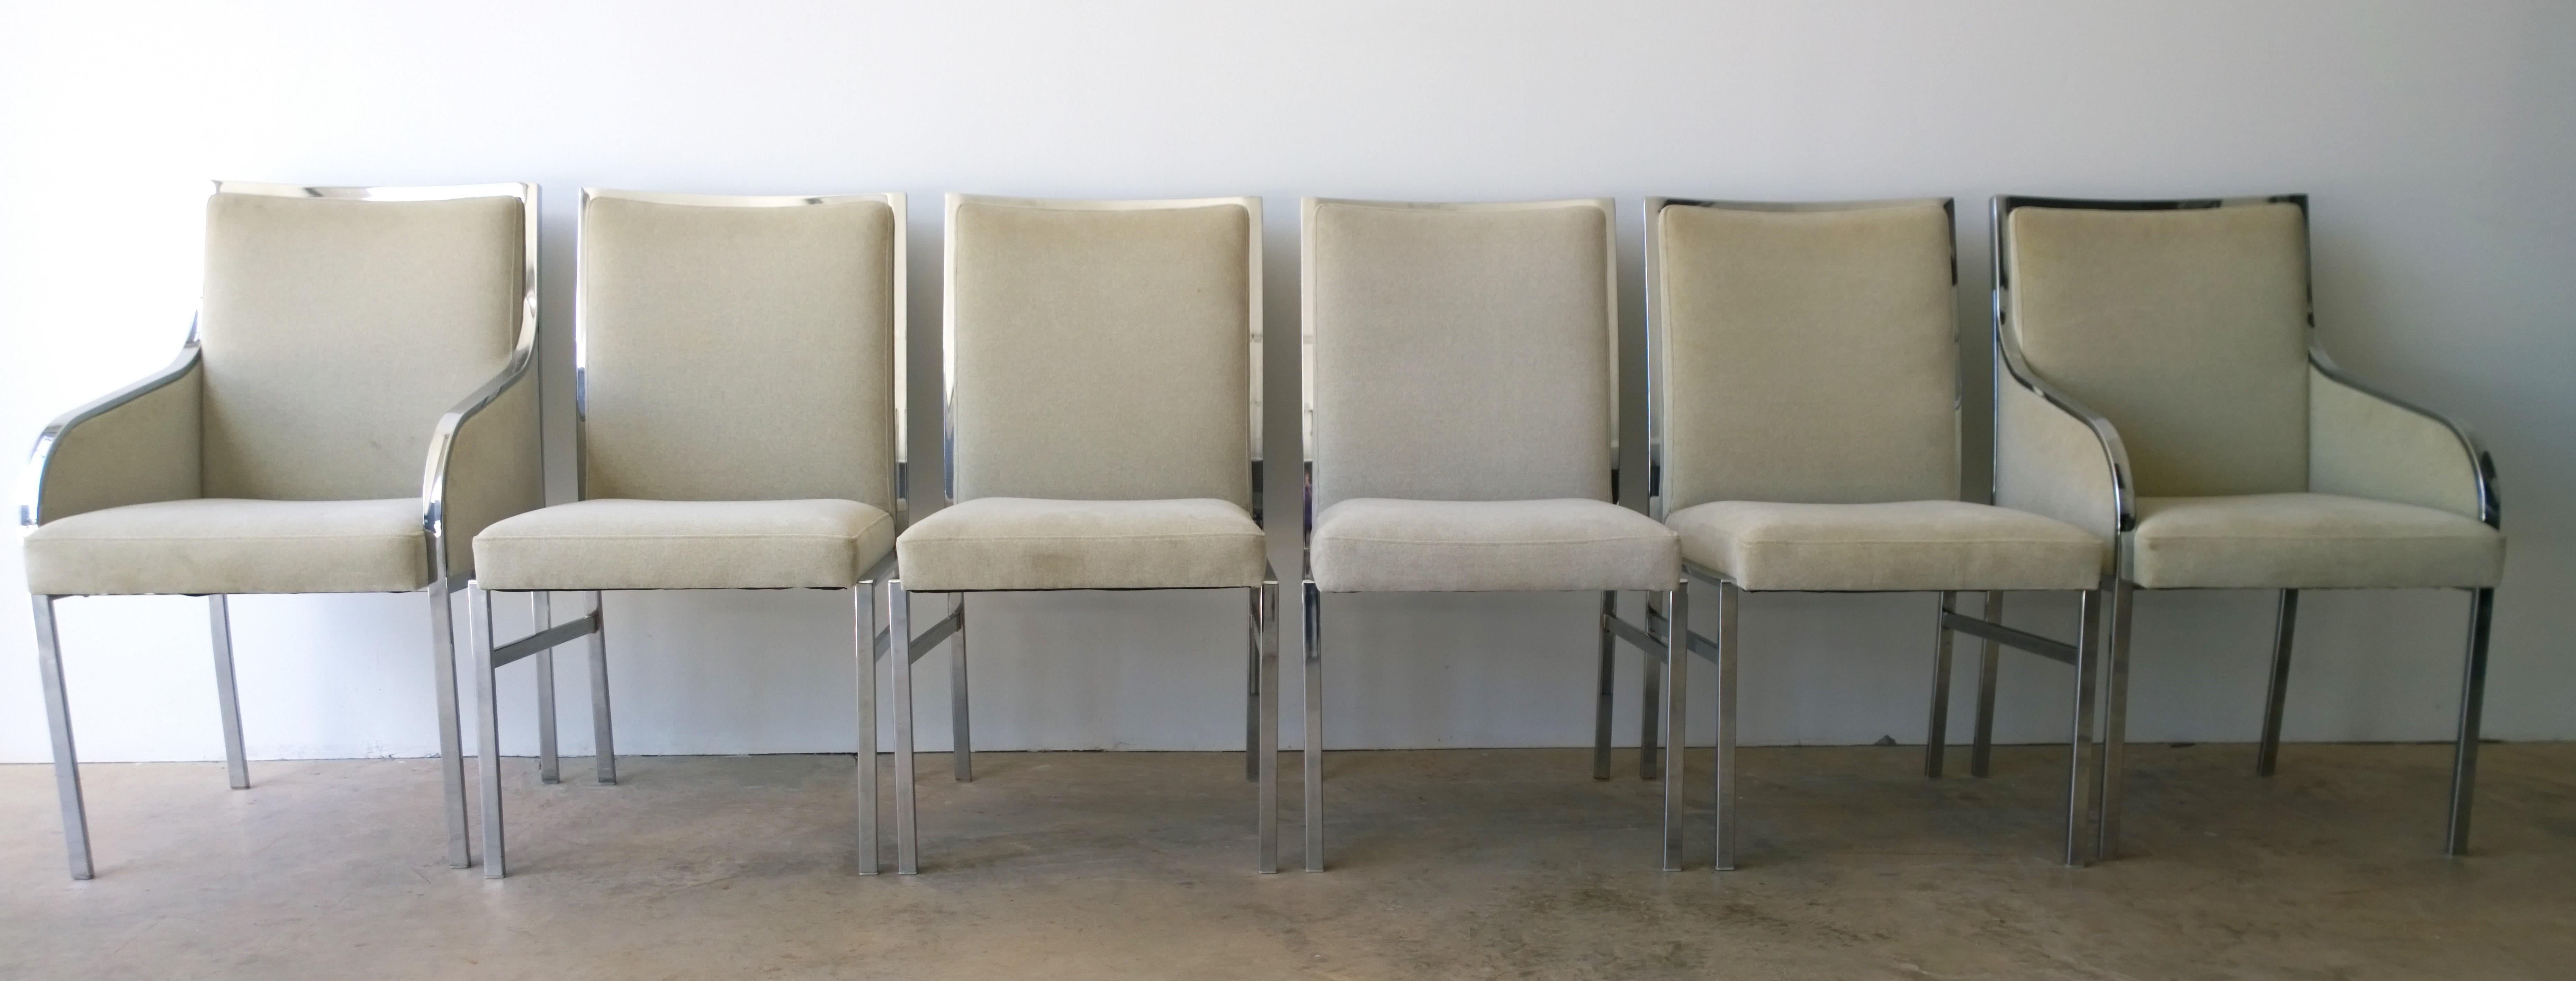 Offered is a Mid-Century Modern set of six chrome and tan felted wool Pierre Cardin style dining chairs. The dining chair set offer to armed end and four side chairs. The set includes two armchairs and four side chairs. The dining chairs have clean